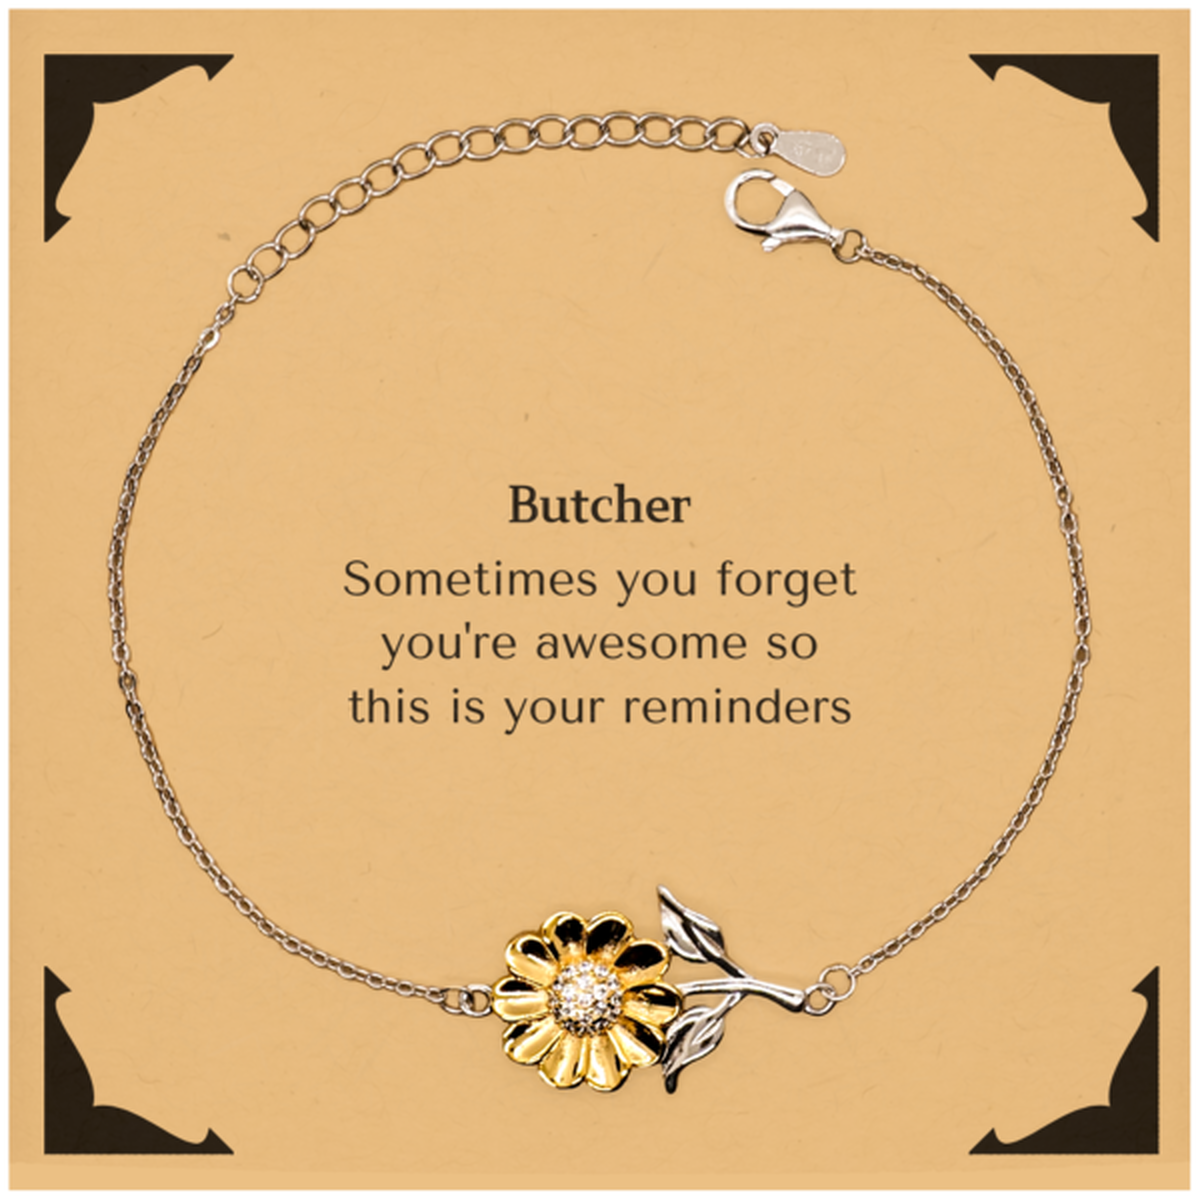 Sentimental Butcher Sunflower Bracelet, Butcher Sometimes you forget you're awesome so this is your reminders, Graduation Christmas Birthday Gifts for Butcher, Men, Women, Coworkers